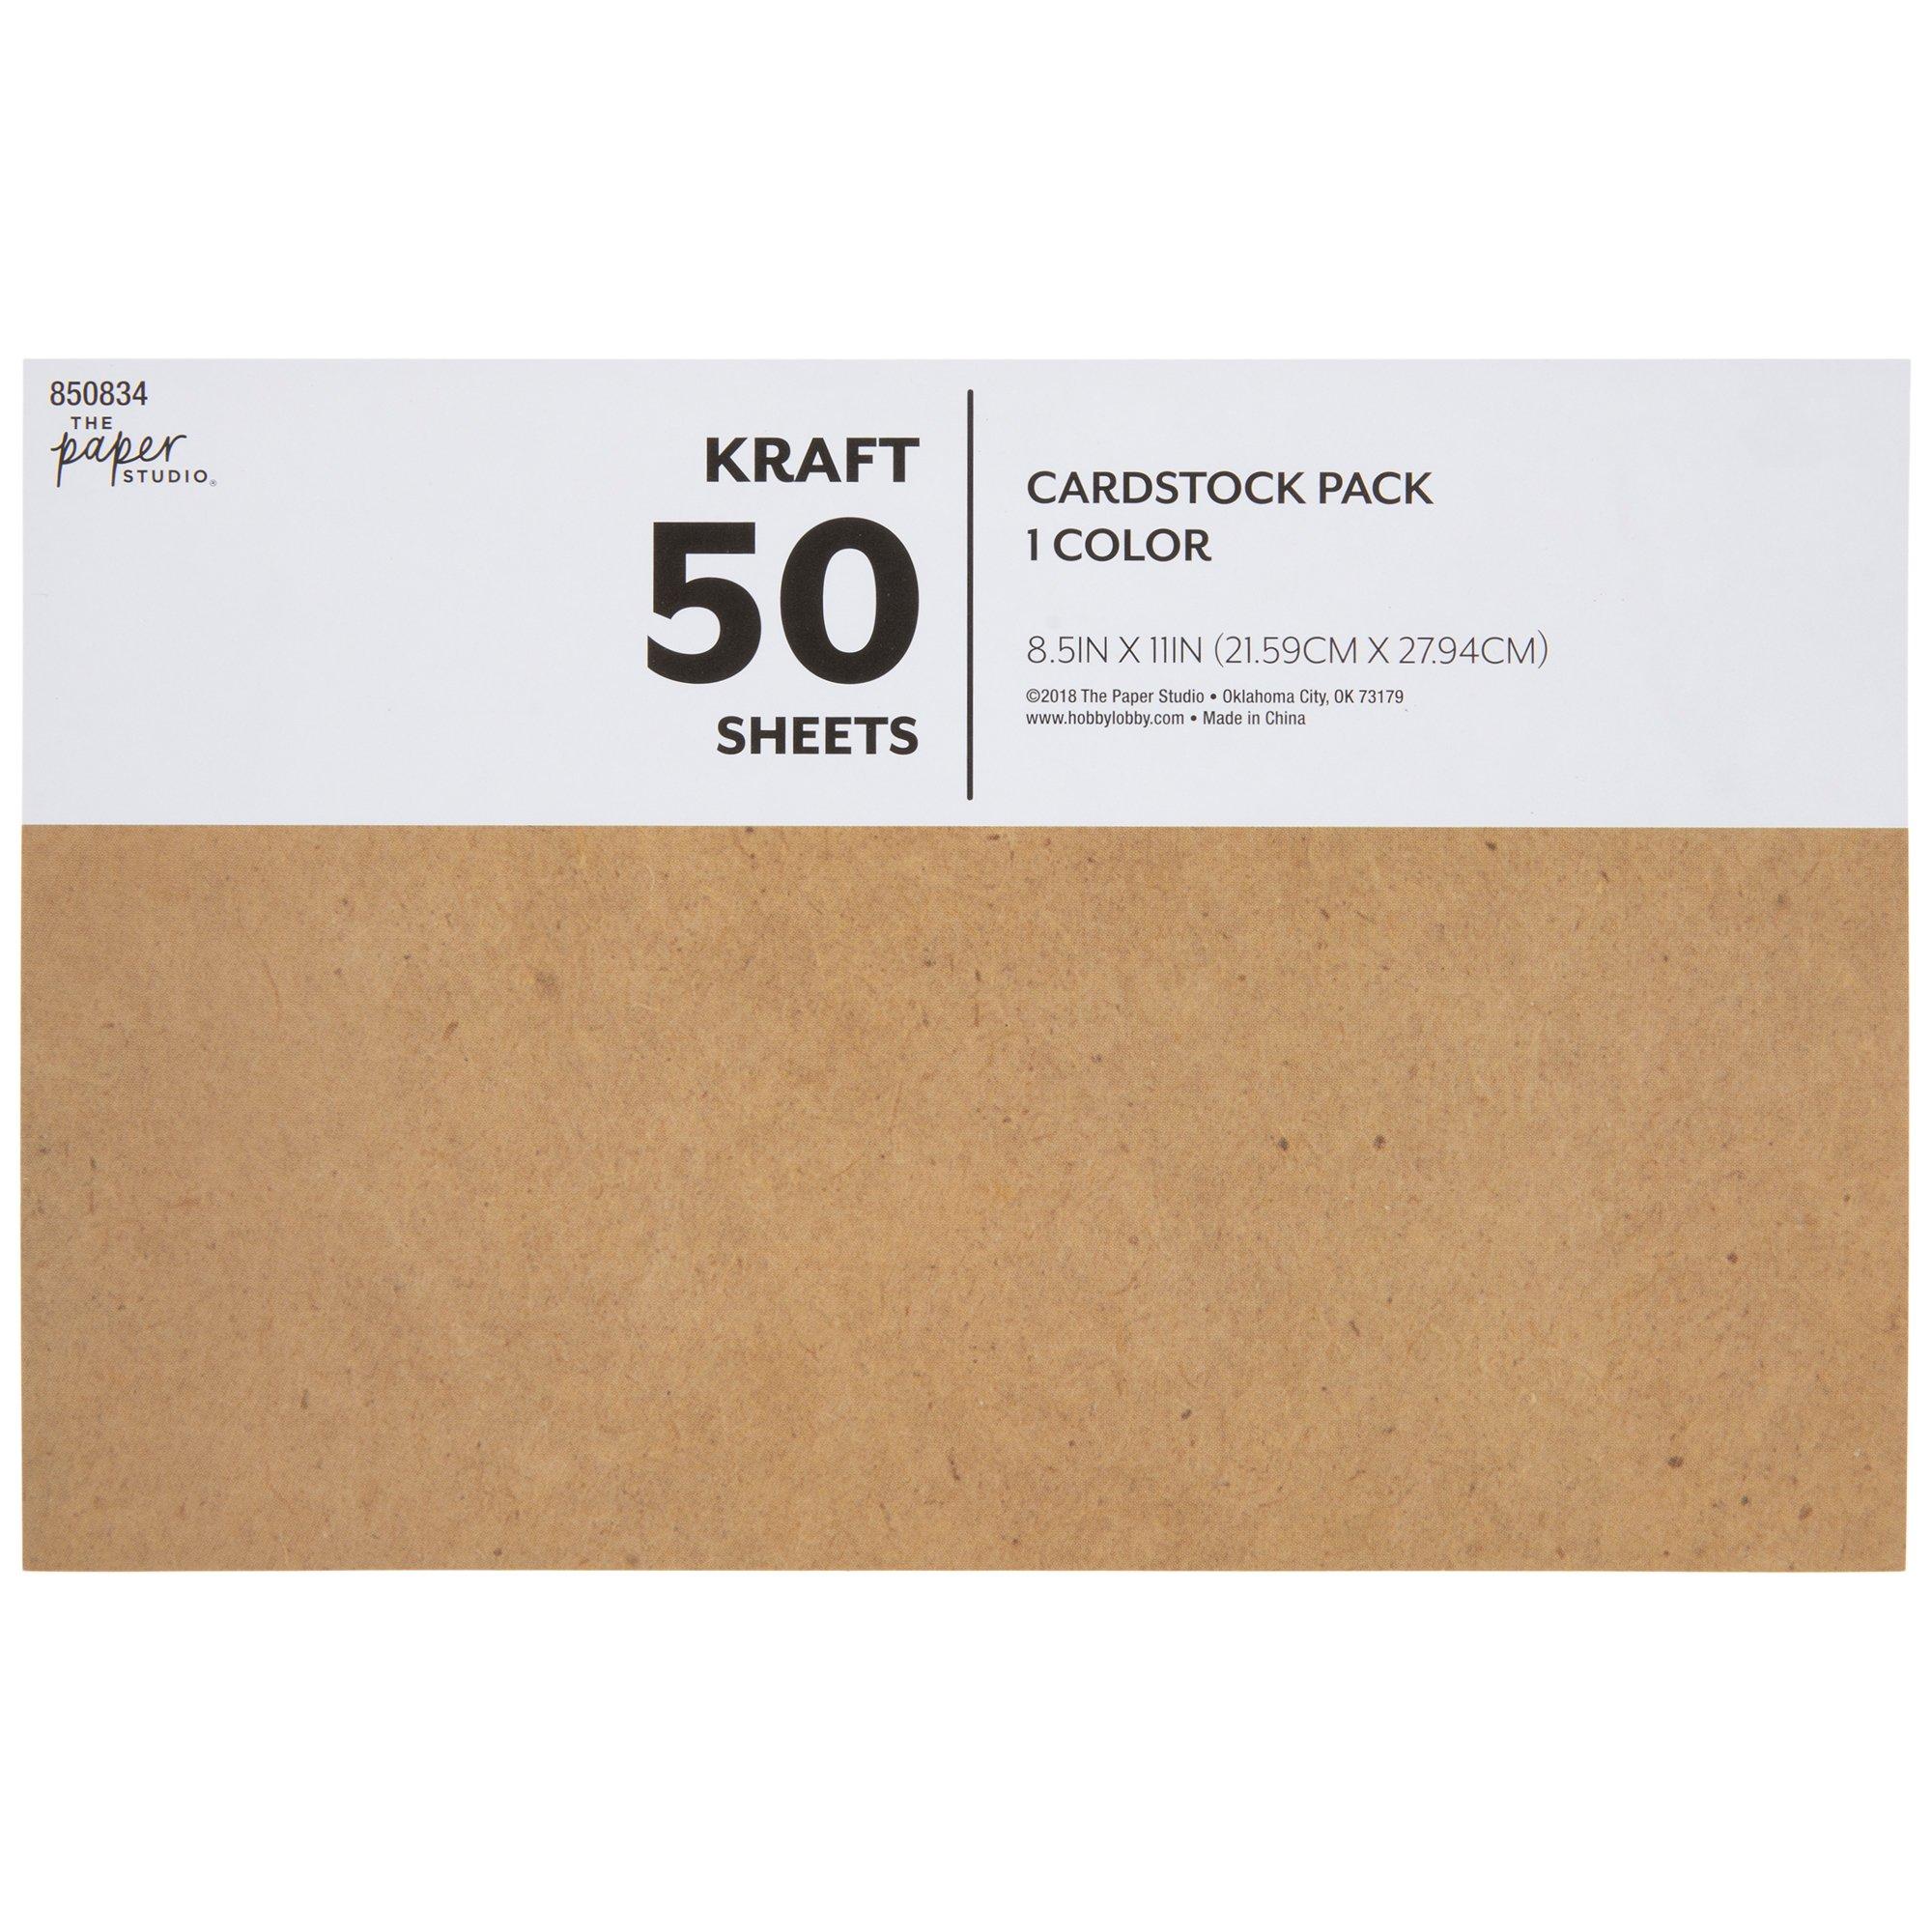 12x12 Cardstock Paper Pack - 110 lb Black Cardstock Scrapbook Paper - Heavy  Duty Double Sided Card Stock for Crafts, Embossing, Cardmaking - 40 Sheets  